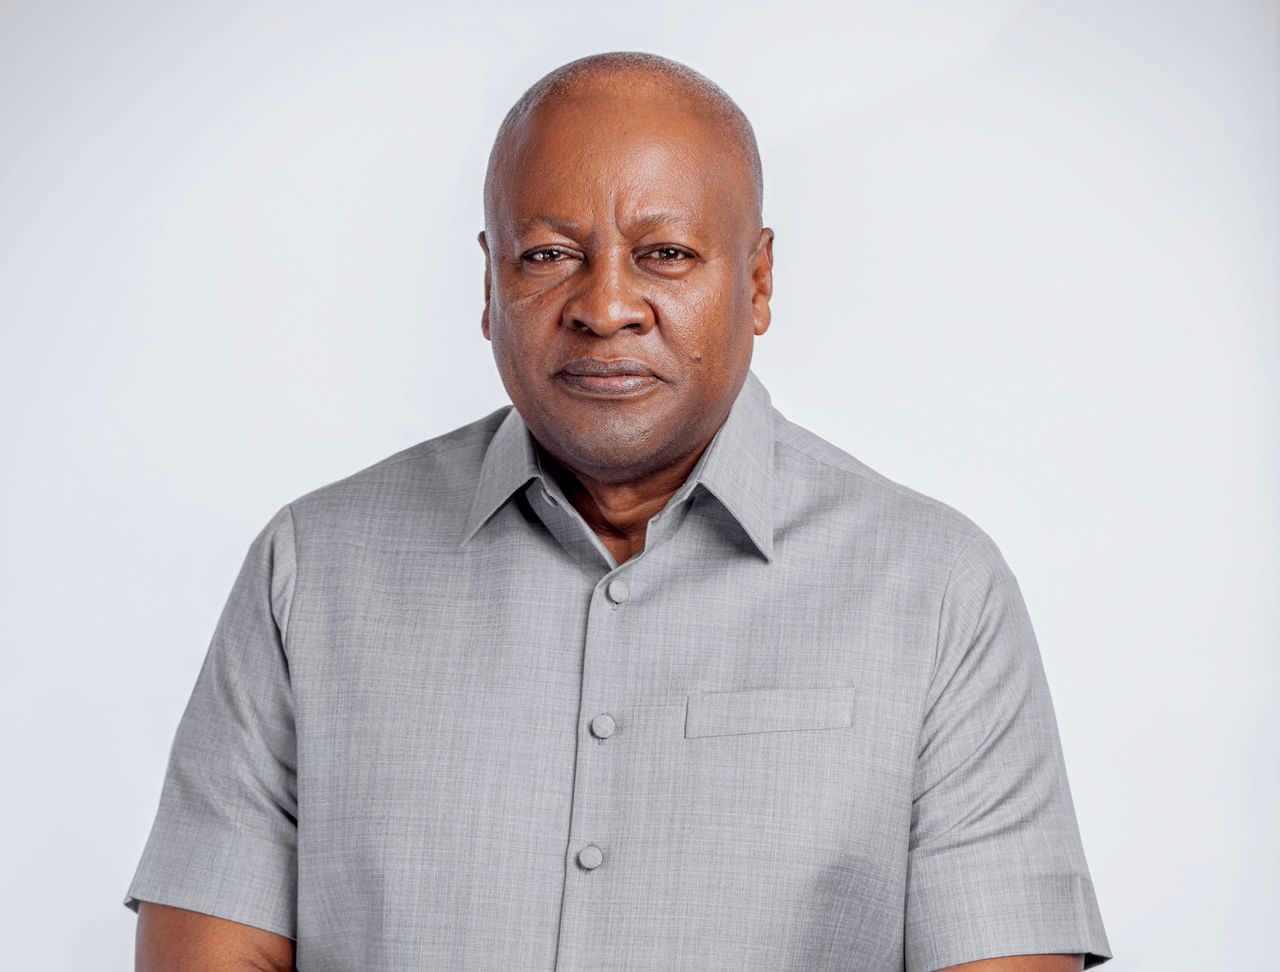 Mahama: I'll amend constitution to allow dual citizens to be Parliamentarians